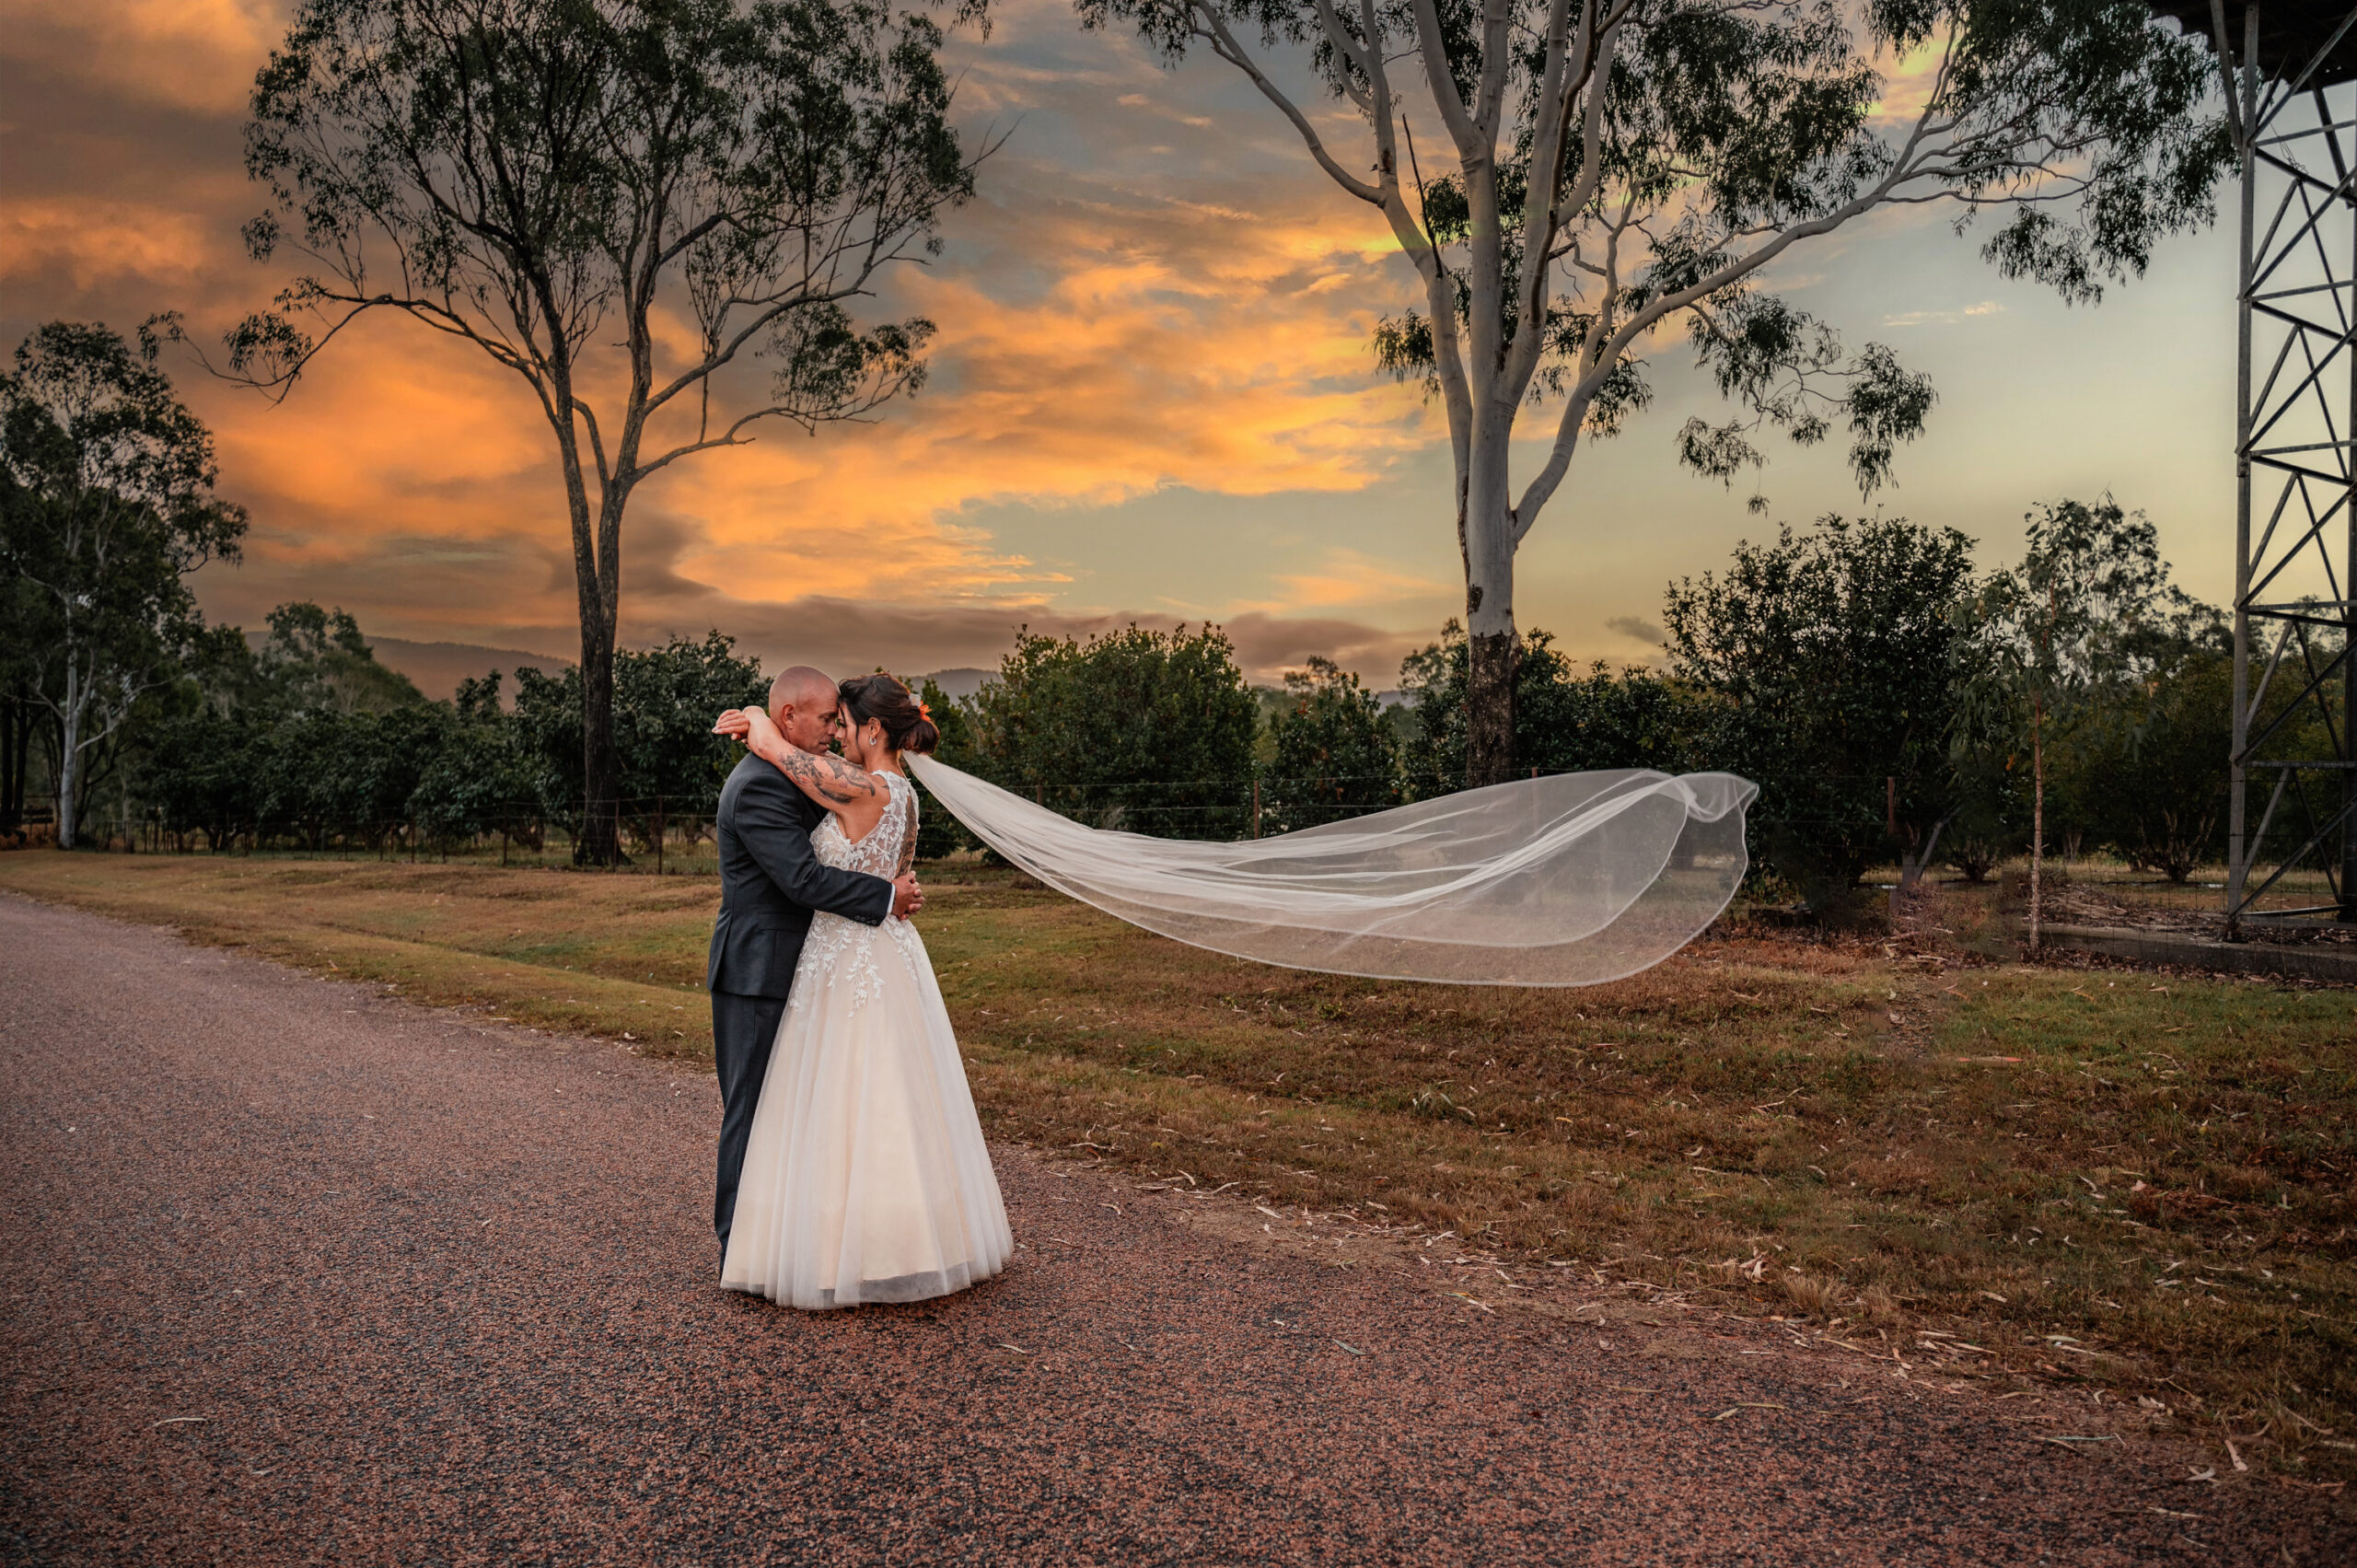 husband and wife embracing on country road at sunset with brides veil blowing in wind